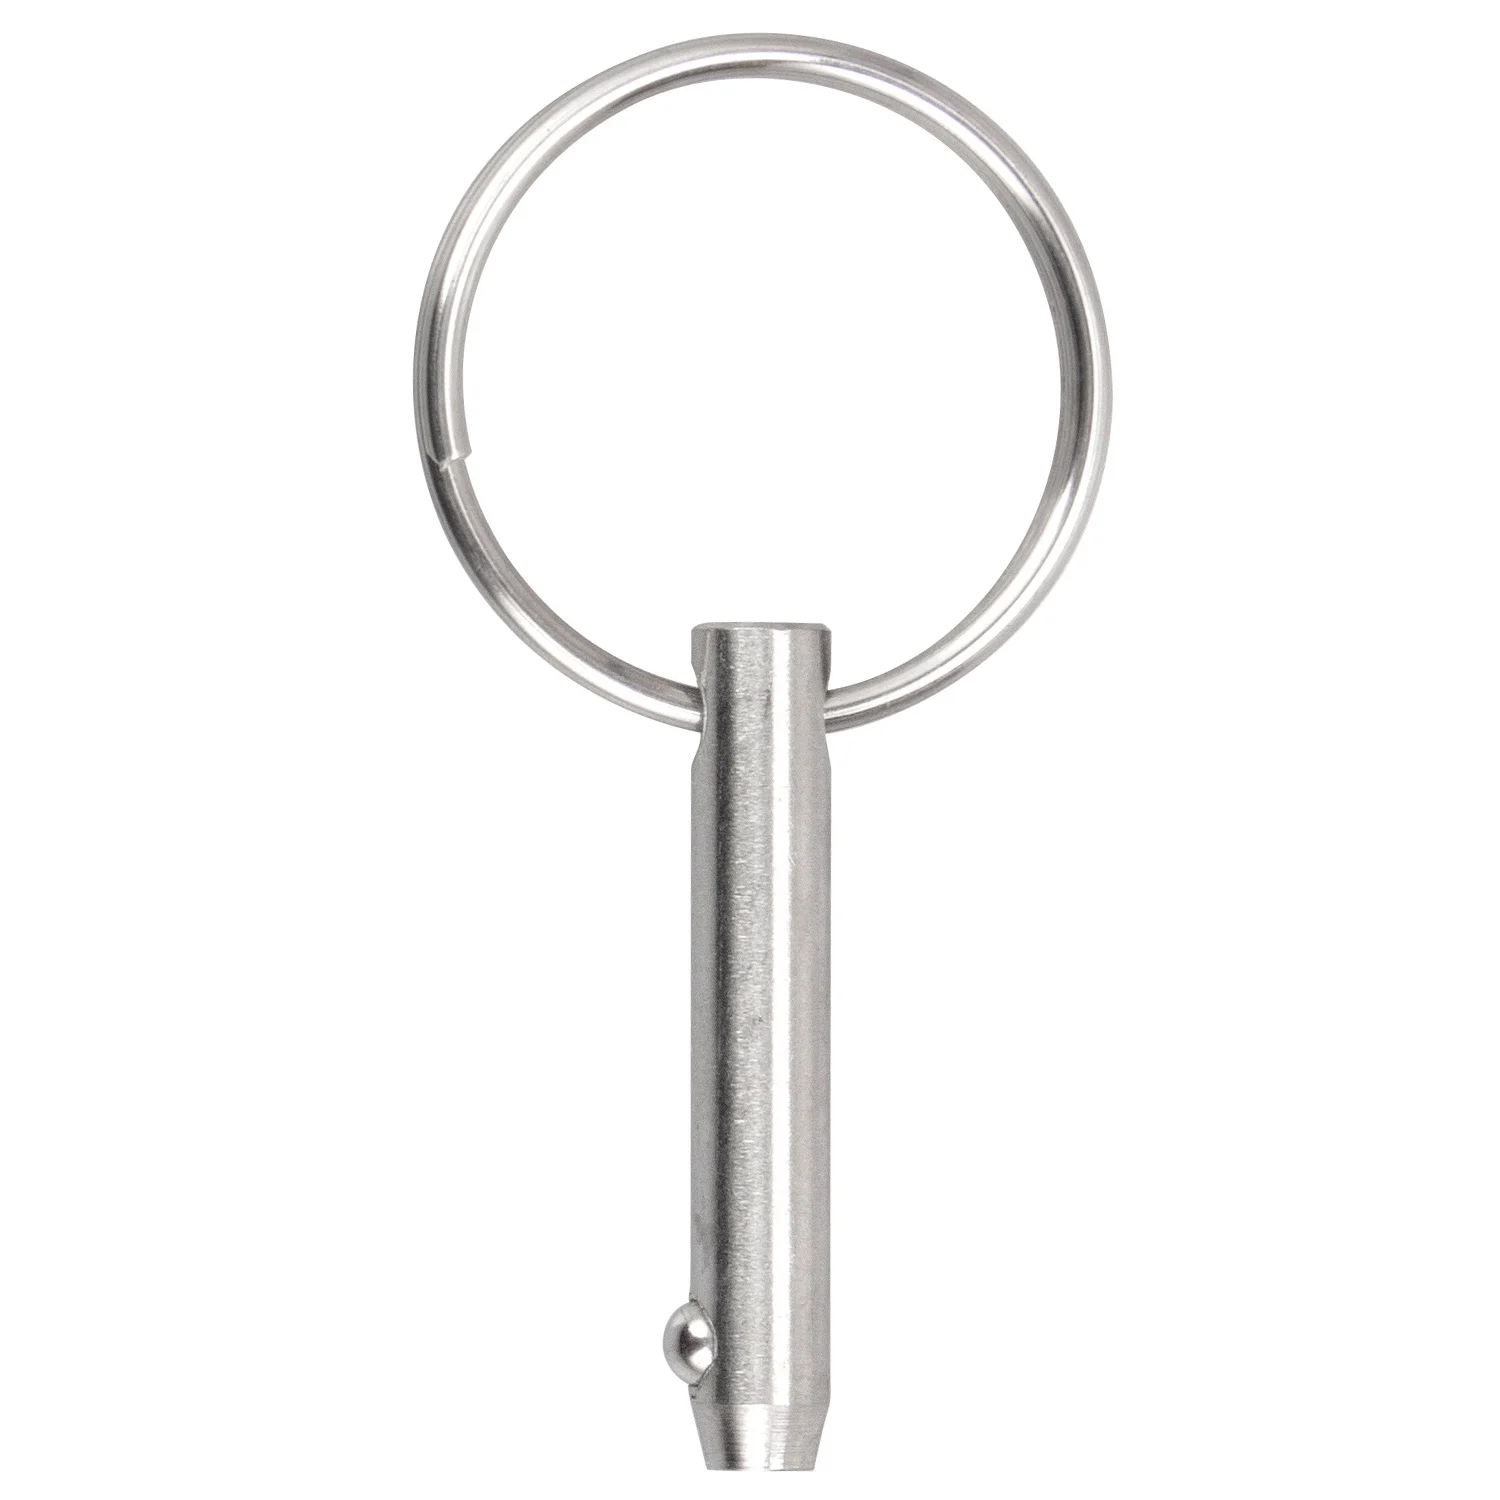 Quick Release Pins 316 Stainless Steel, Bimini Top Pins Diameter 0.25 Inch/6.3mm, Total Length 2 Inch/51mm(Optional 1 or 2) quick release pin bimini top pin total length 2 56 inch 65mm diameter 0 25 inch 6 3mm 316 stainless steel 1 or 2